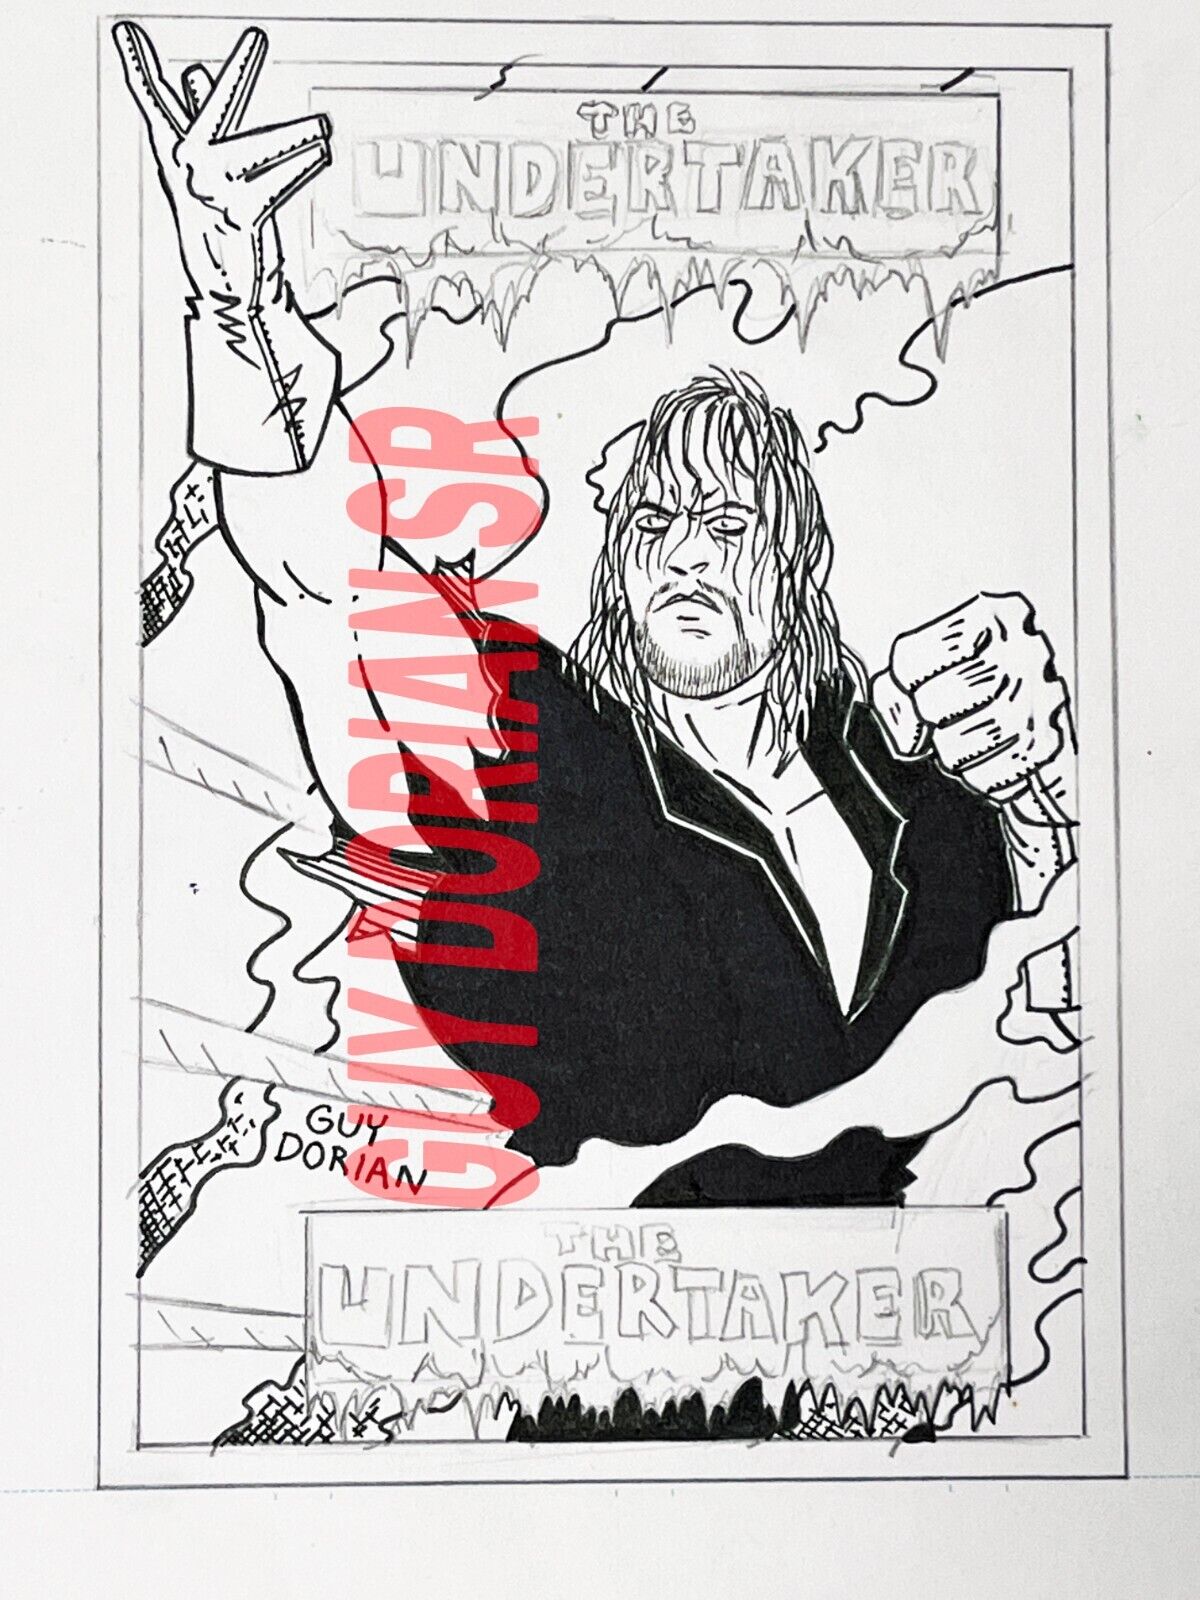 1995 WWF Just Toys Bend-Ems Series 2 Undertaker